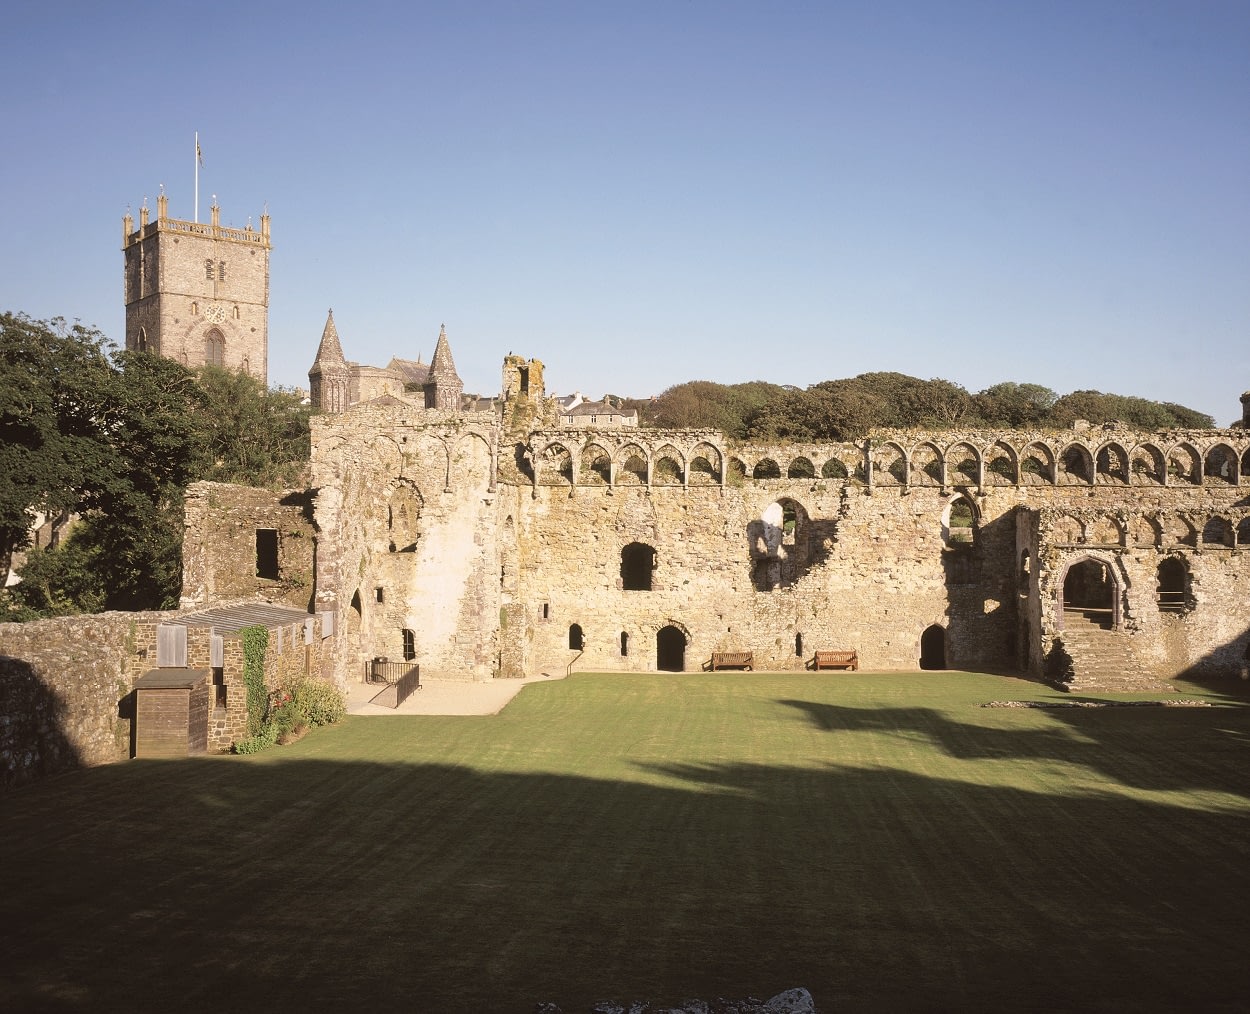 bishops palace st david's cathedral cathedrals religious sites historic sites